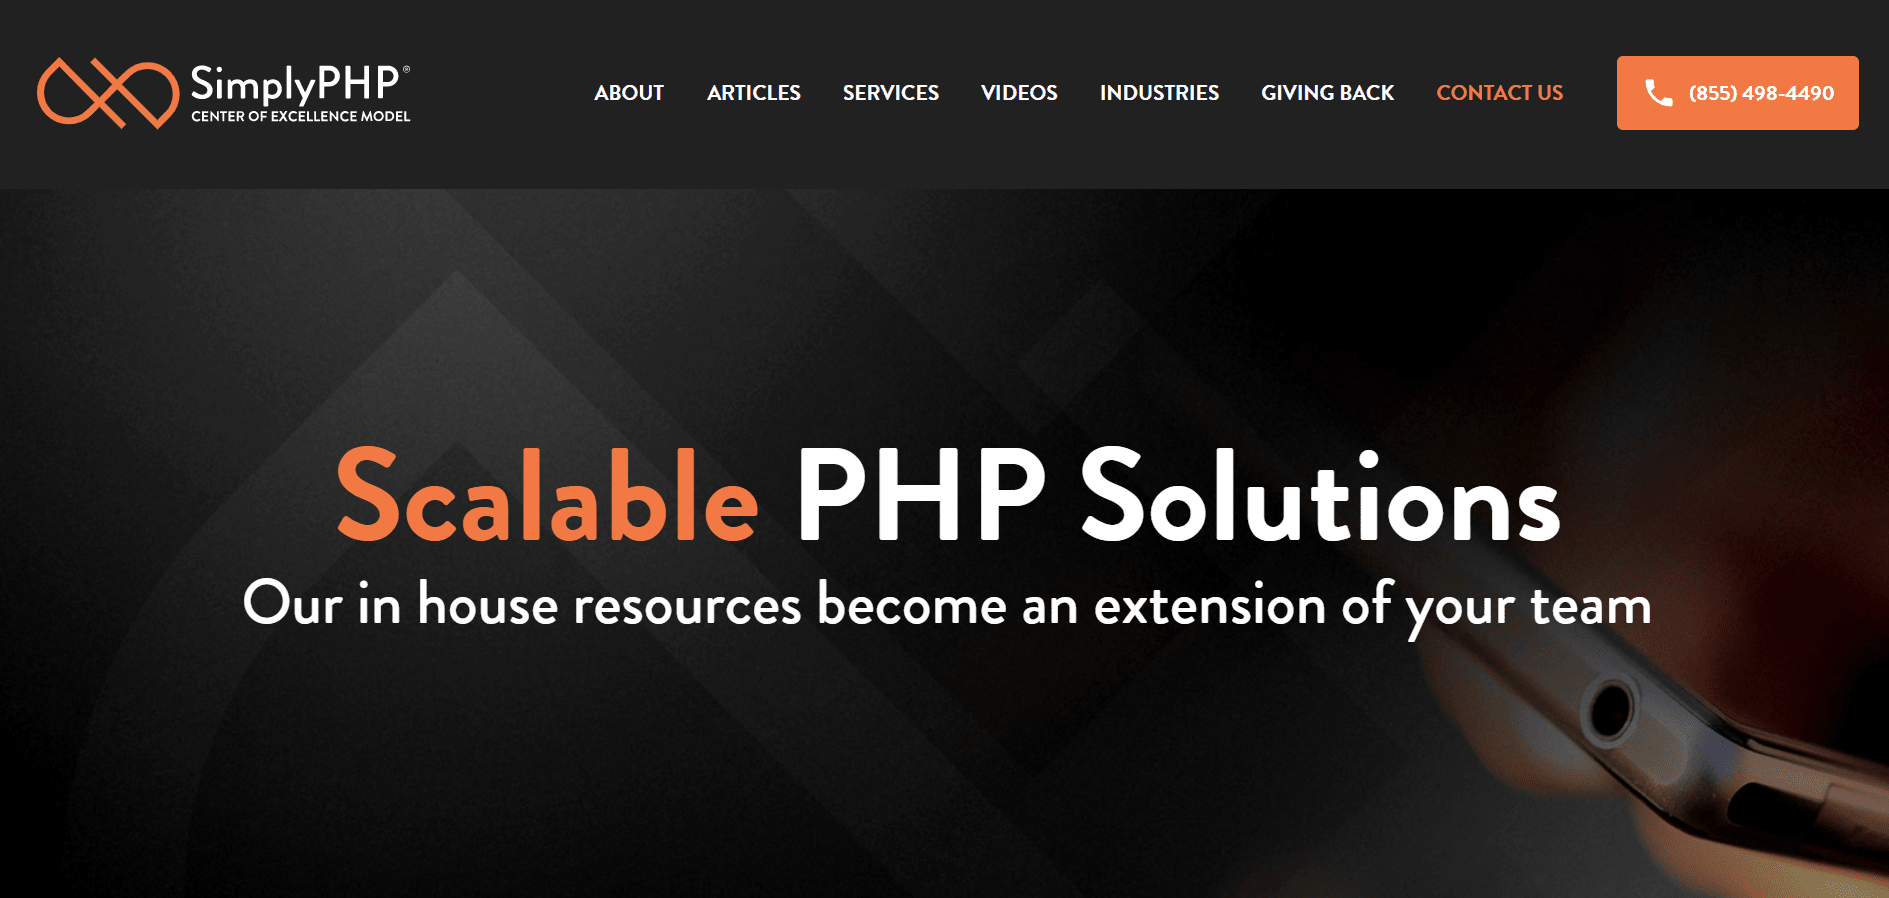 Landing page of SimplyPHP 